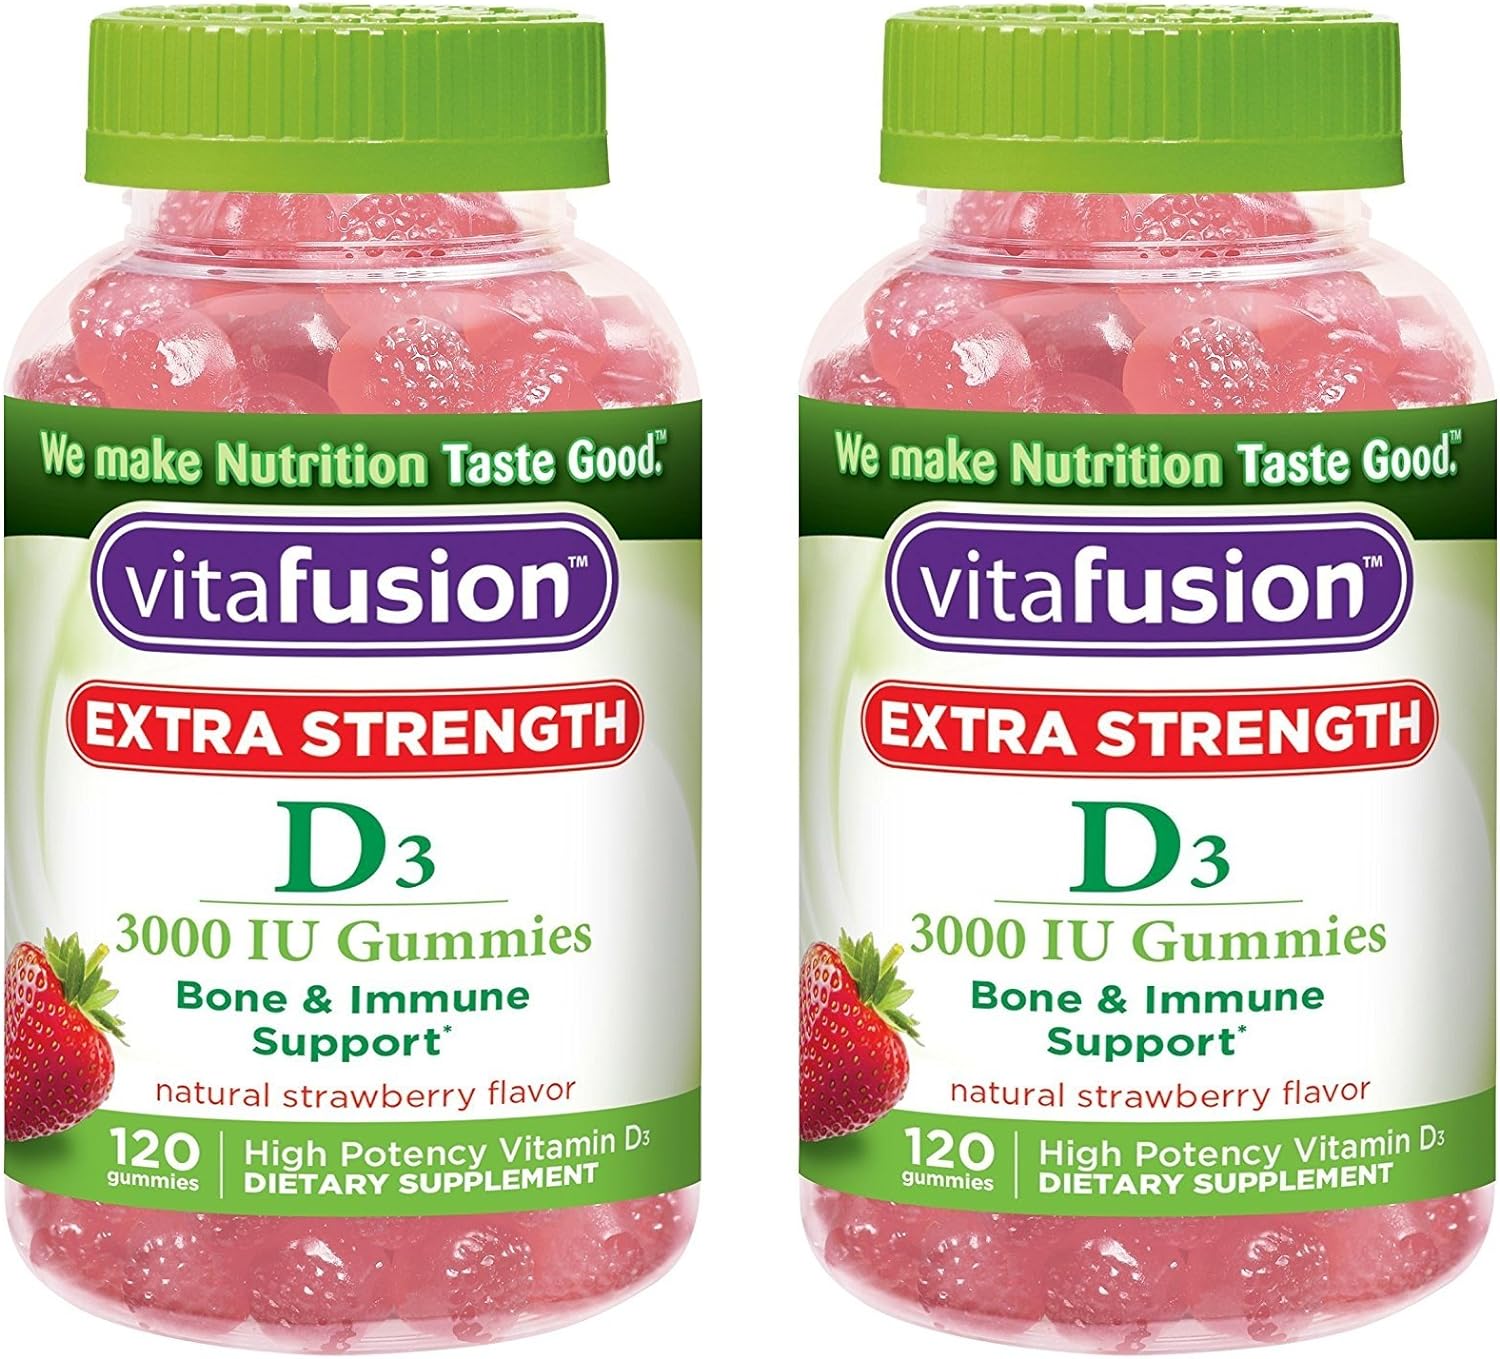 Vitafusion Extra Strength DpXYQH Vitamin D3 Gummies, 120 Count (Pack of 2)